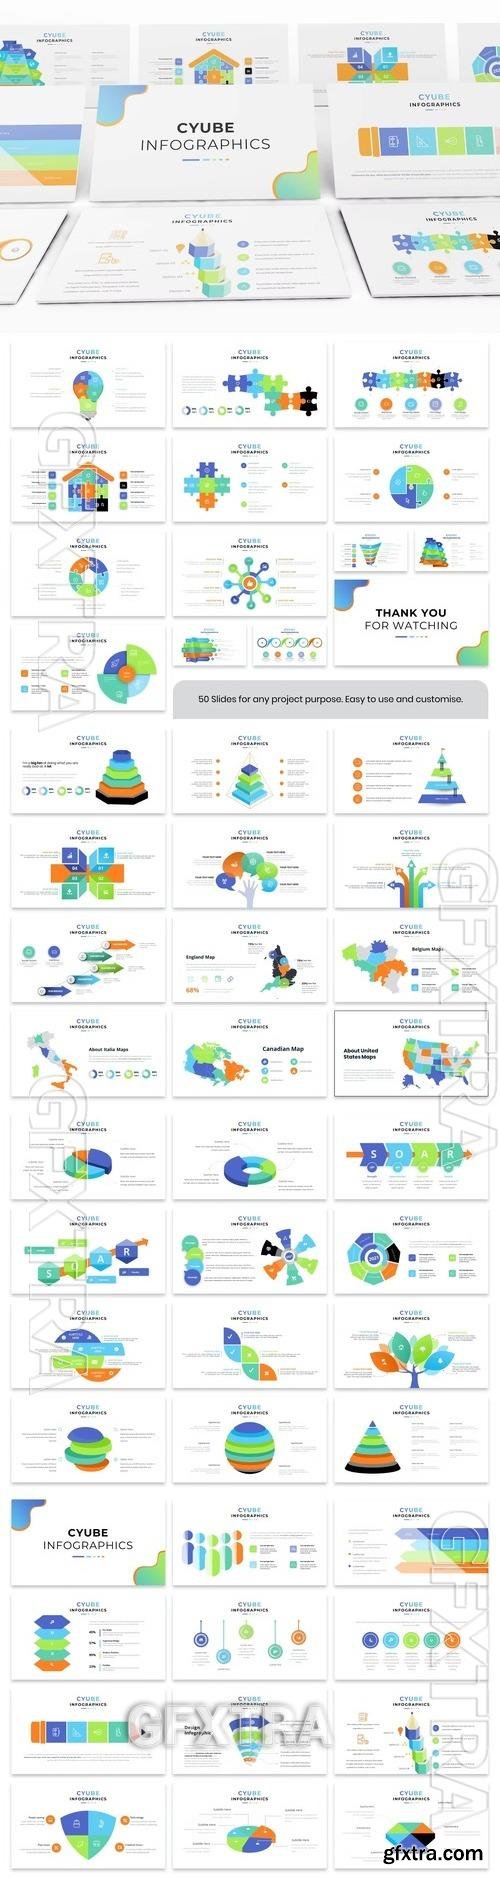 Cyube Infographic Presentation PowerPoint Template 8LEEUBY